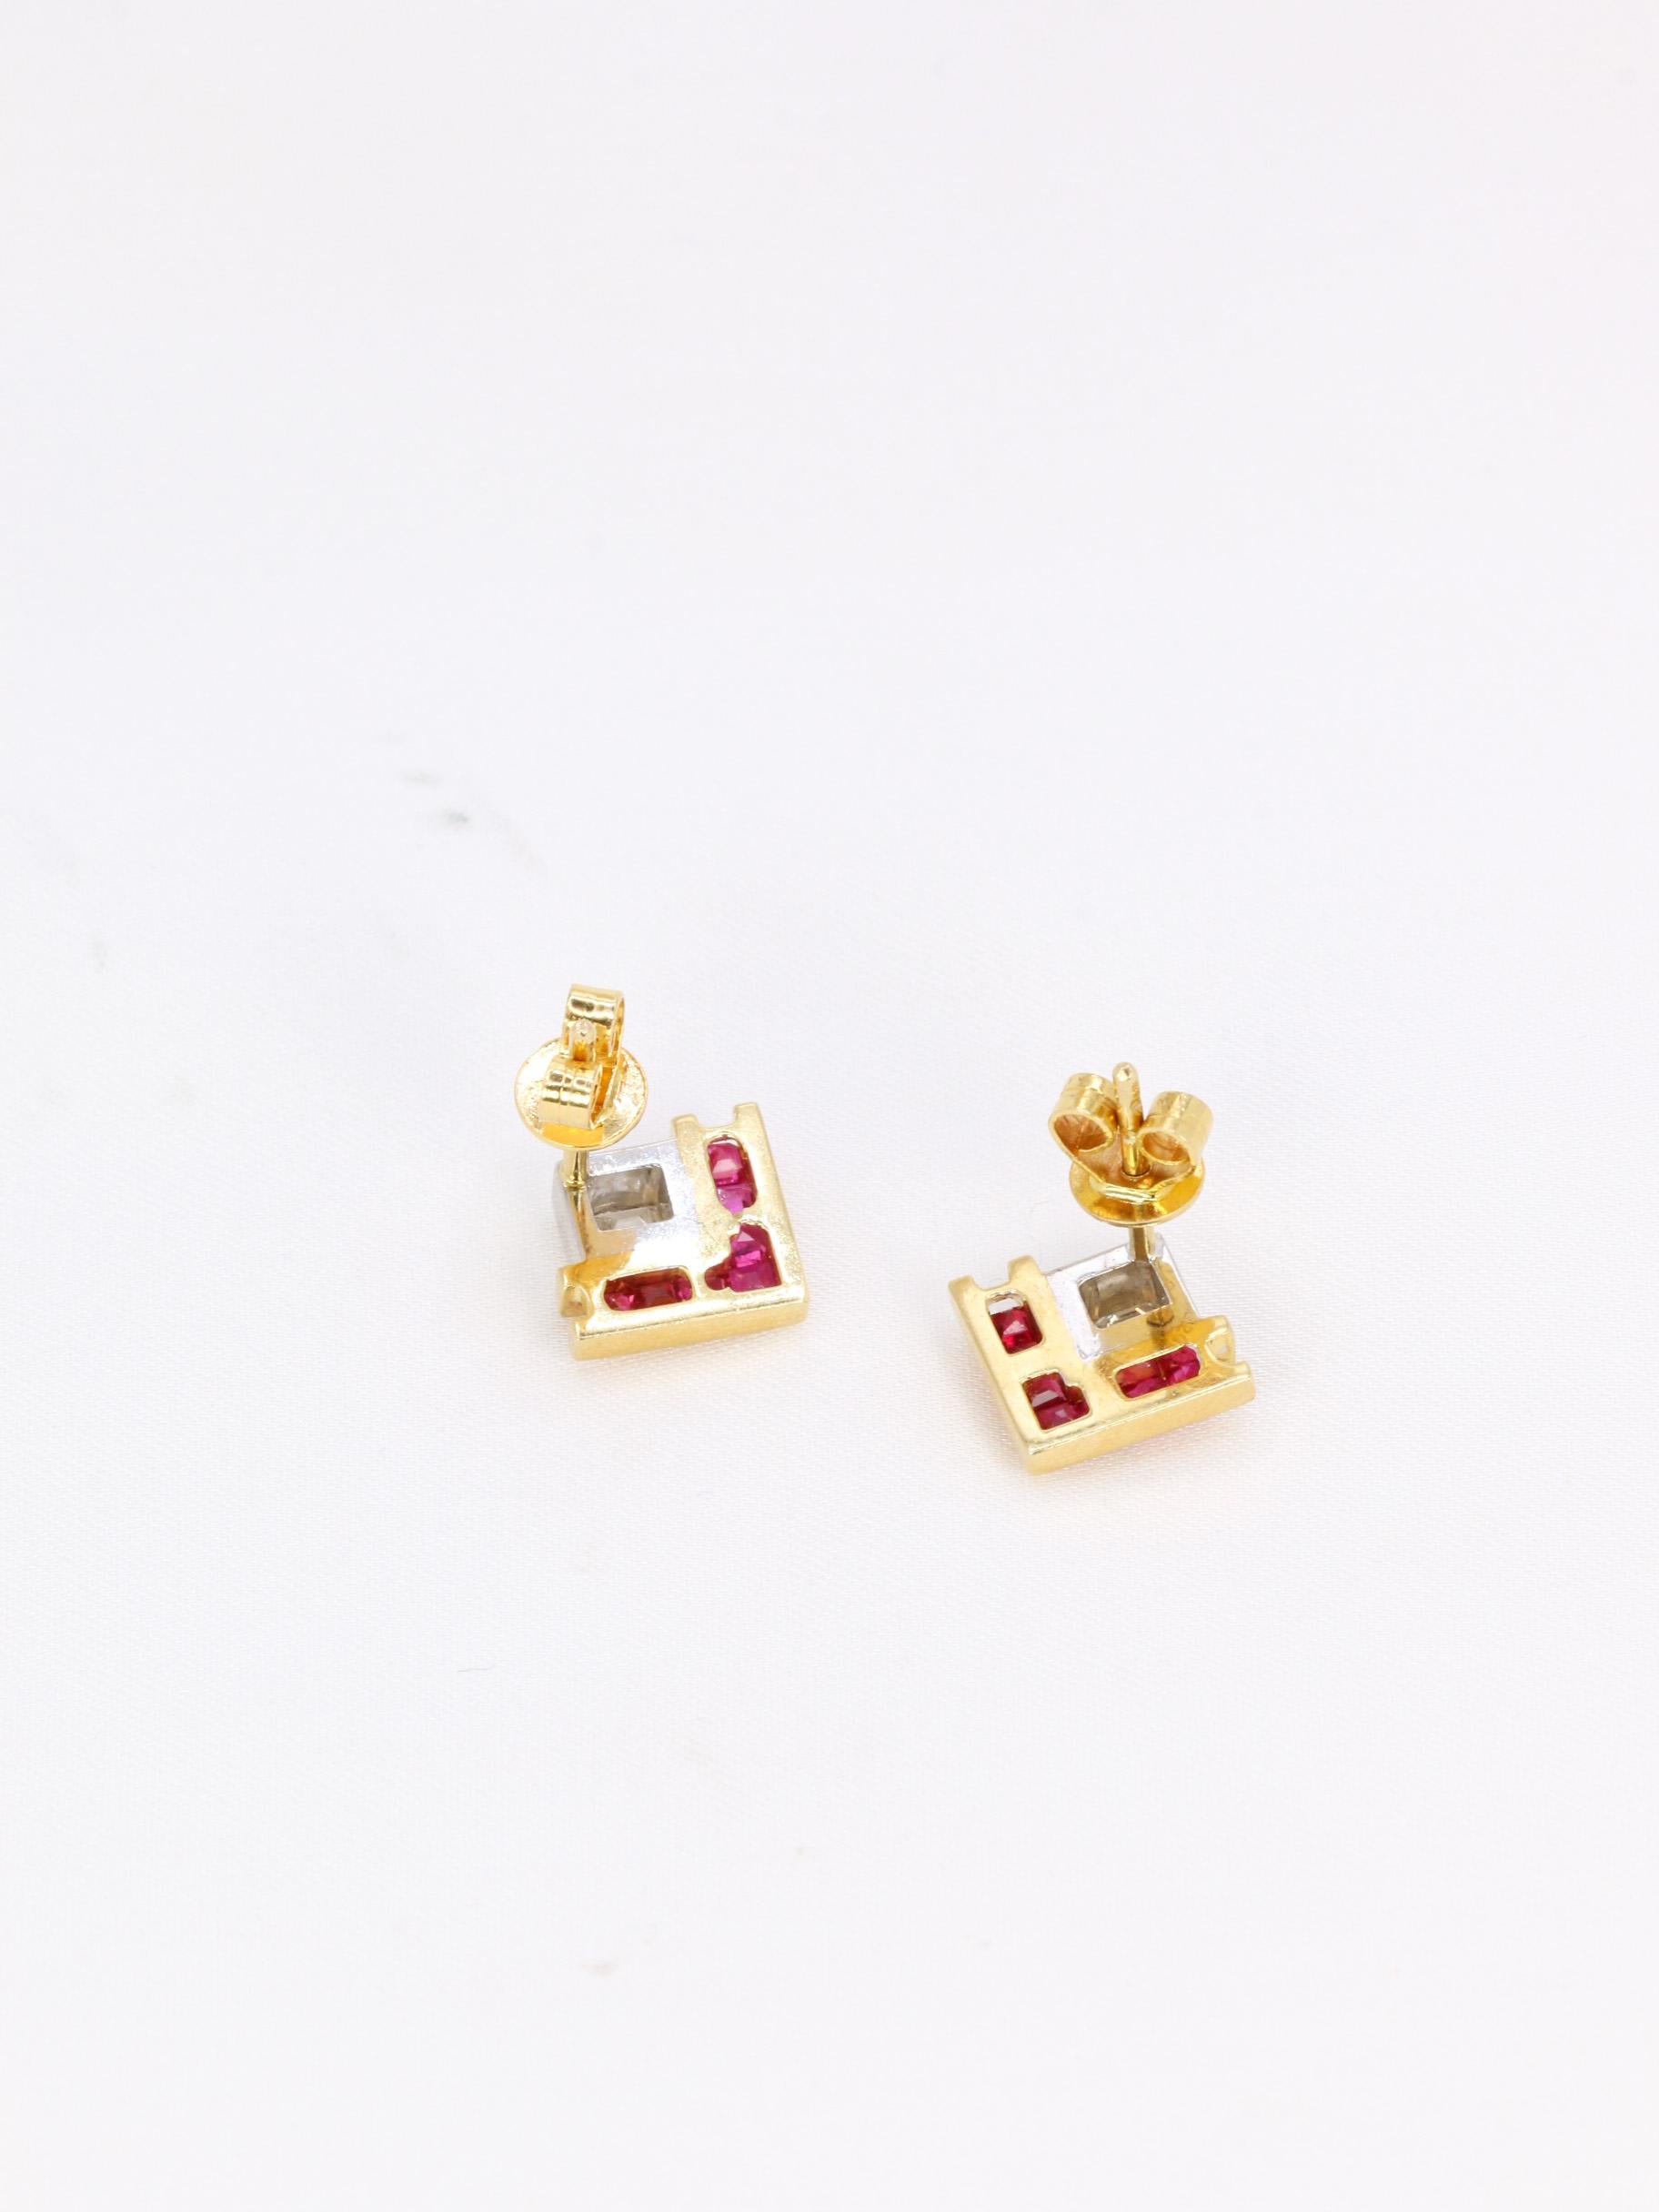 Geometric earrings in 18k (750°/°°) yellow and white gold set with a center emerald-cut diamond weighing approx. 0.20 carats of very fine DEF VS+ quality and 2 lines of calibrated rubies.
Probably vintage American work.

Very good condition, micro